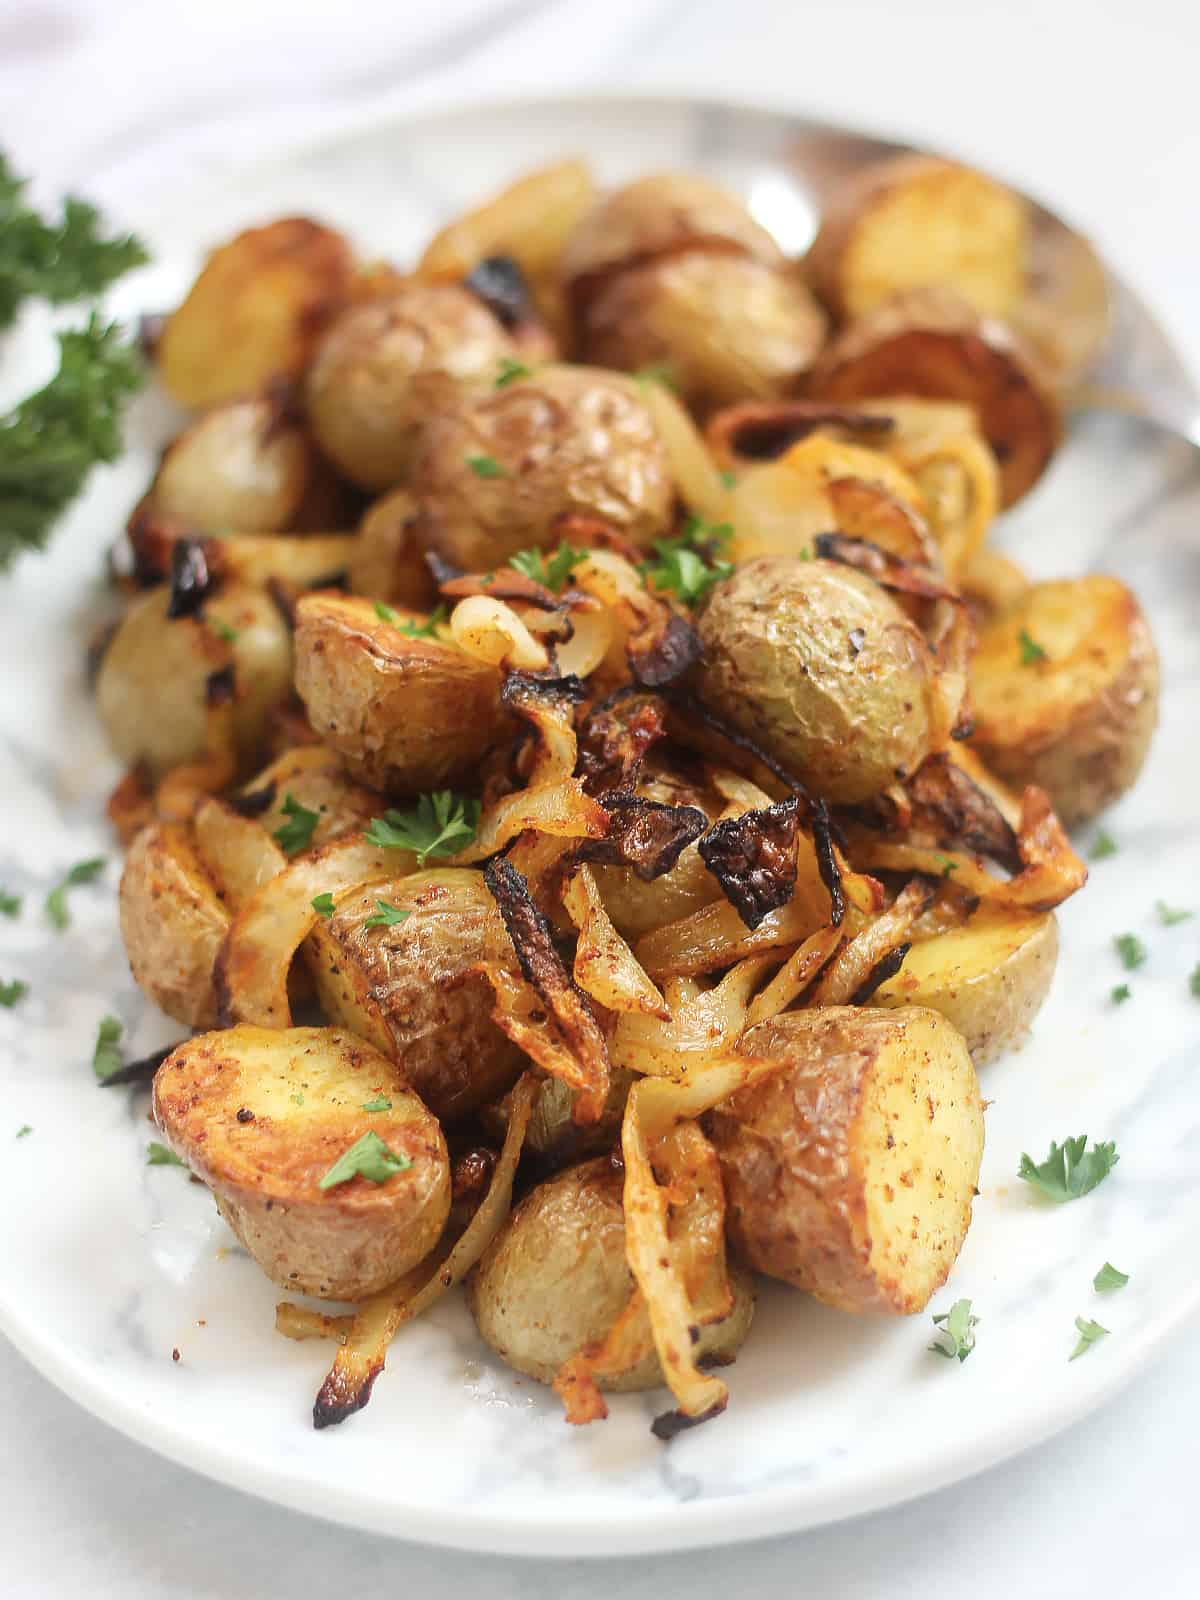 Roasted potatoes and sliced onions served on a white plate.